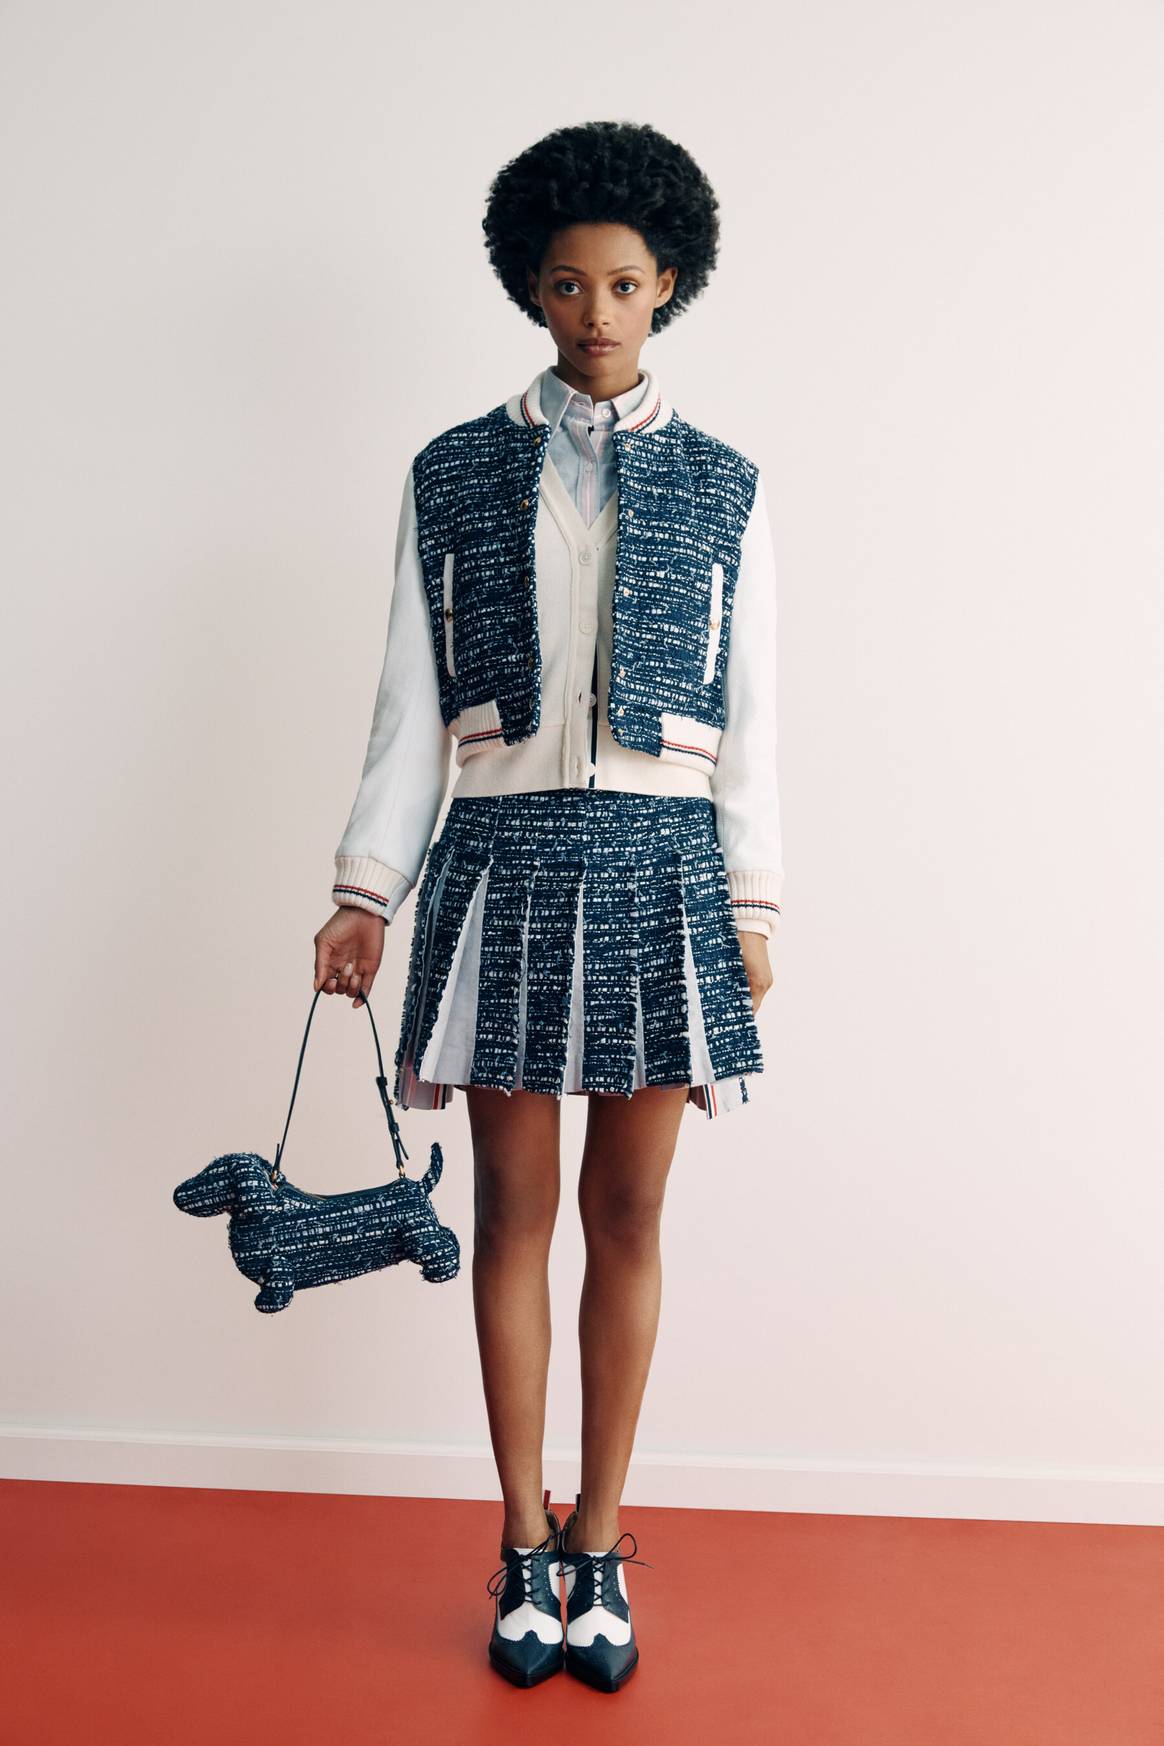 A look from the capsule collection of Thom Browne and Saks.